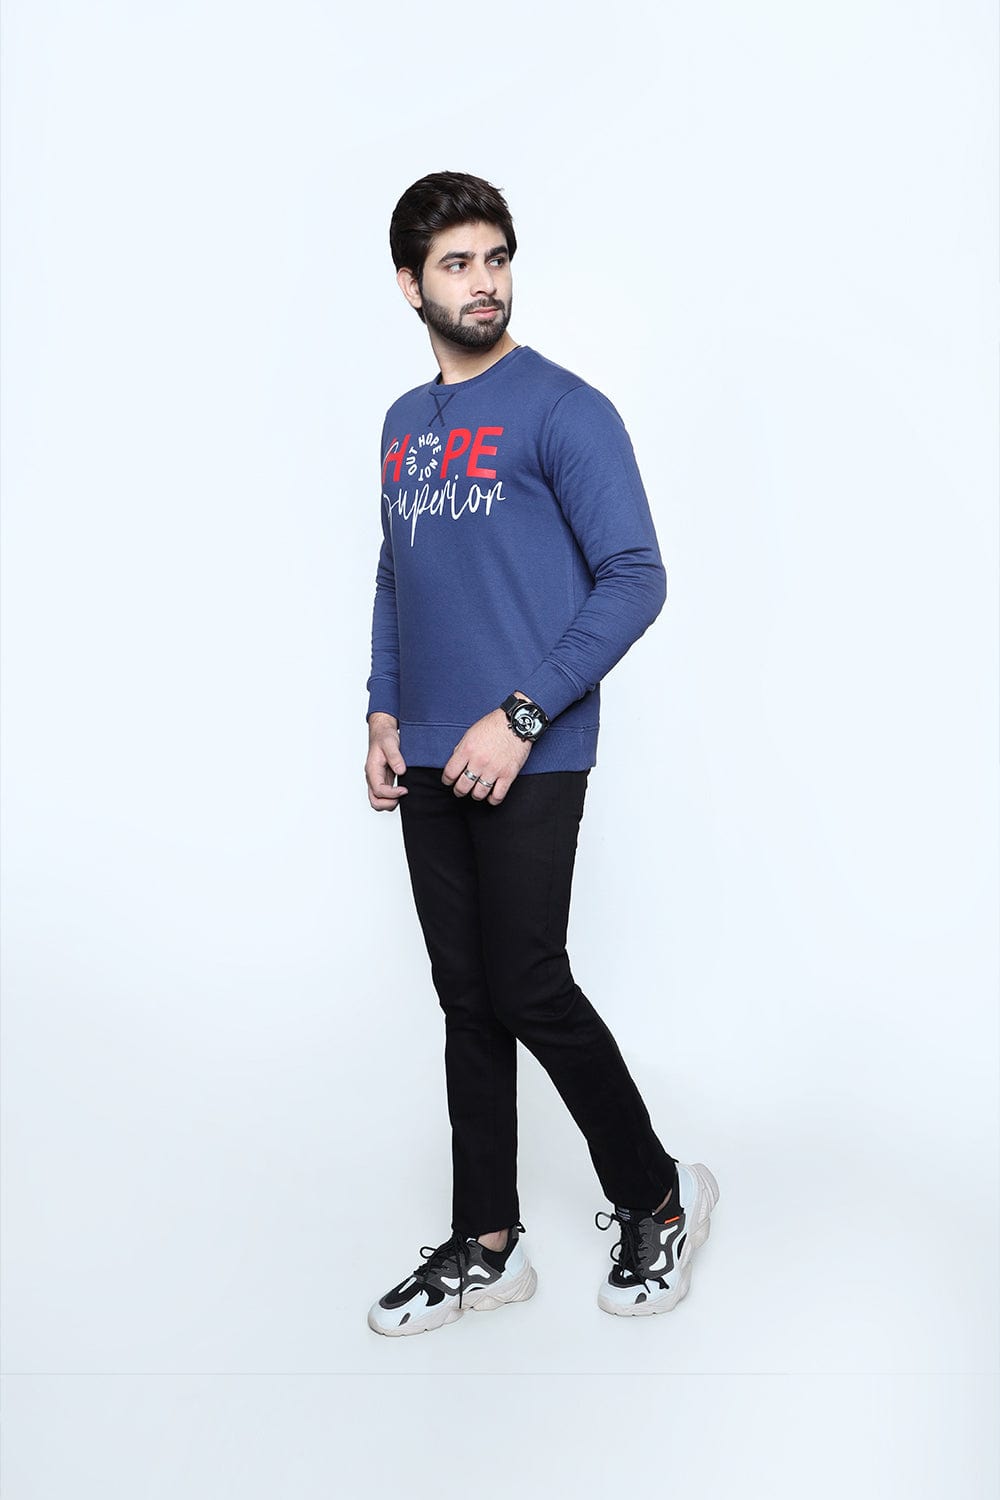 Hope Not Out by Shahid Afridi Men Sweat Shirt Blue Graphic Print Sweatshirt - Comfortable and Stylish